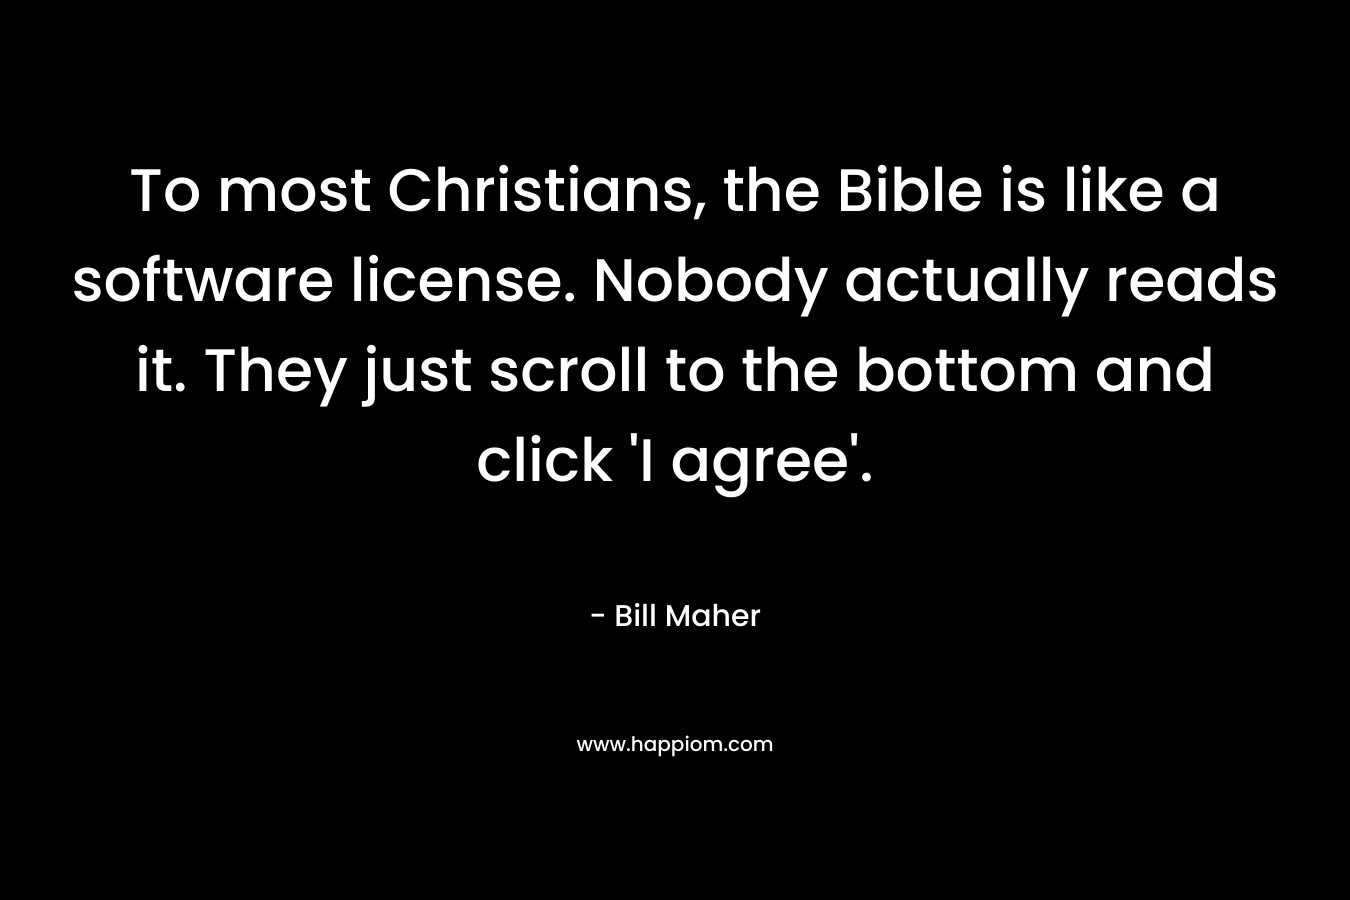 To most Christians, the Bible is like a software license. Nobody actually reads it. They just scroll to the bottom and click ‘I agree’. – Bill Maher